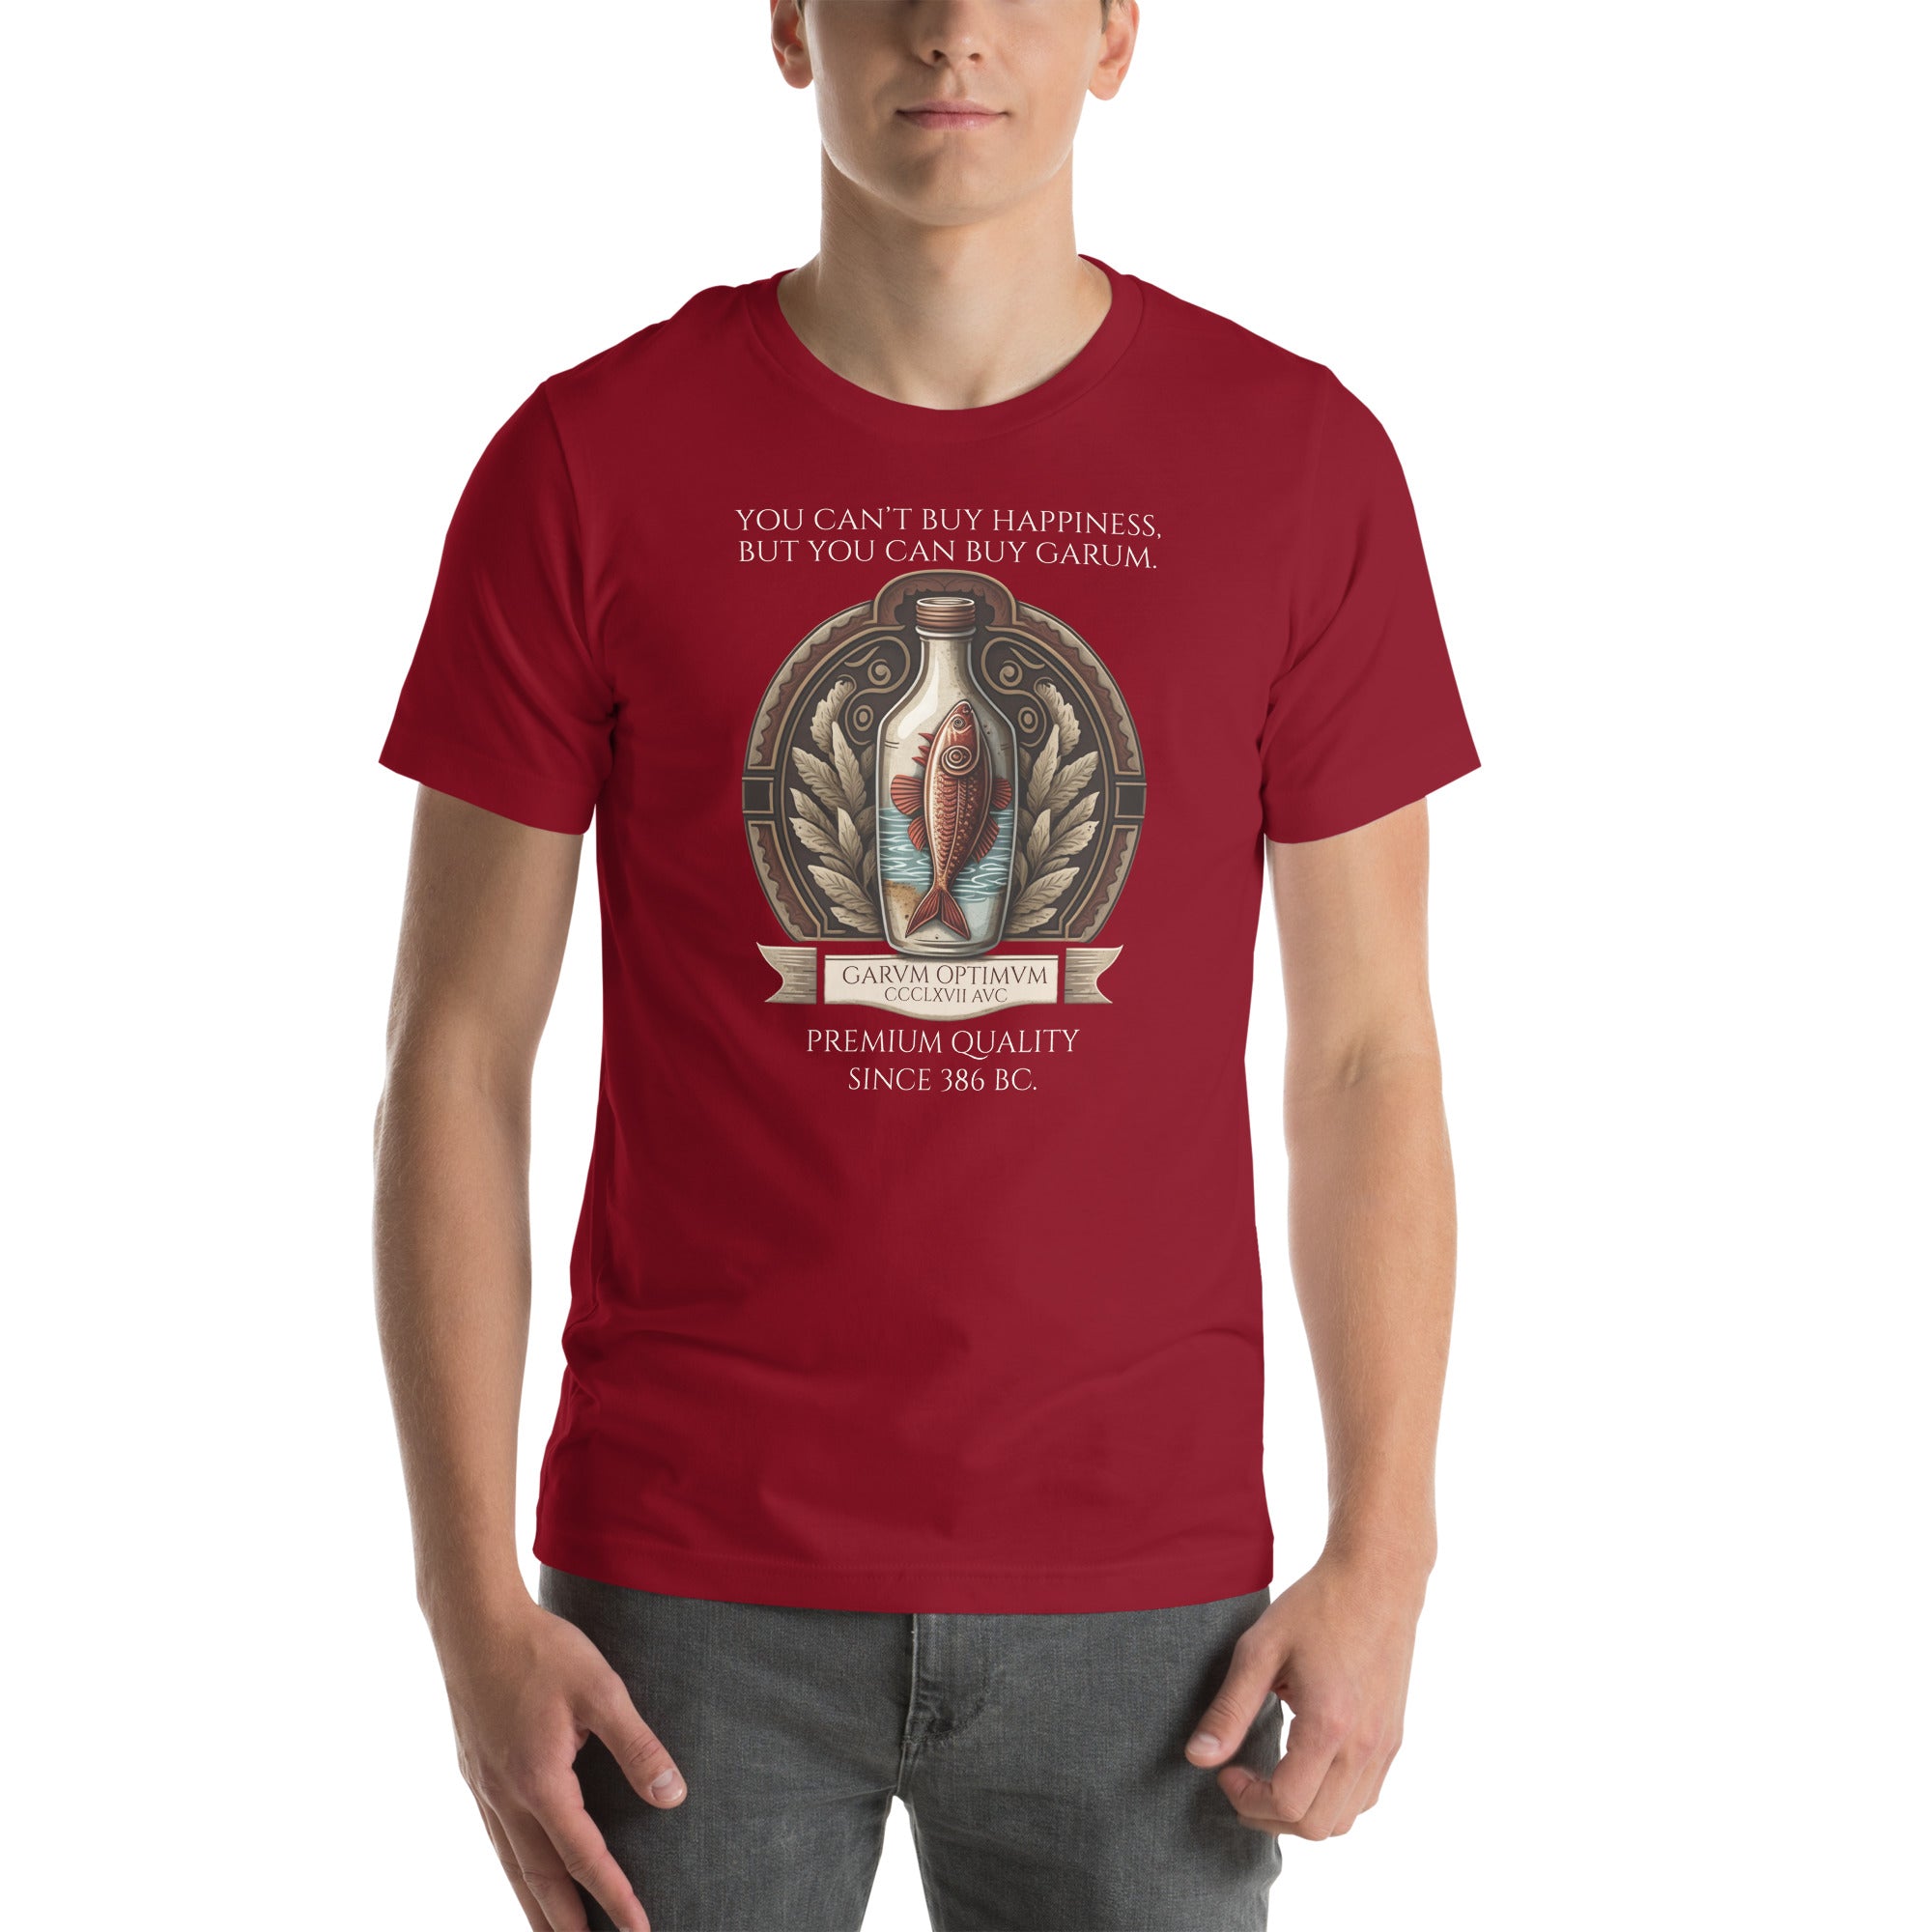 You Can Not Buy Happiness, But You Can Buy Garum - Ancient Rome Unisex T-Shirt